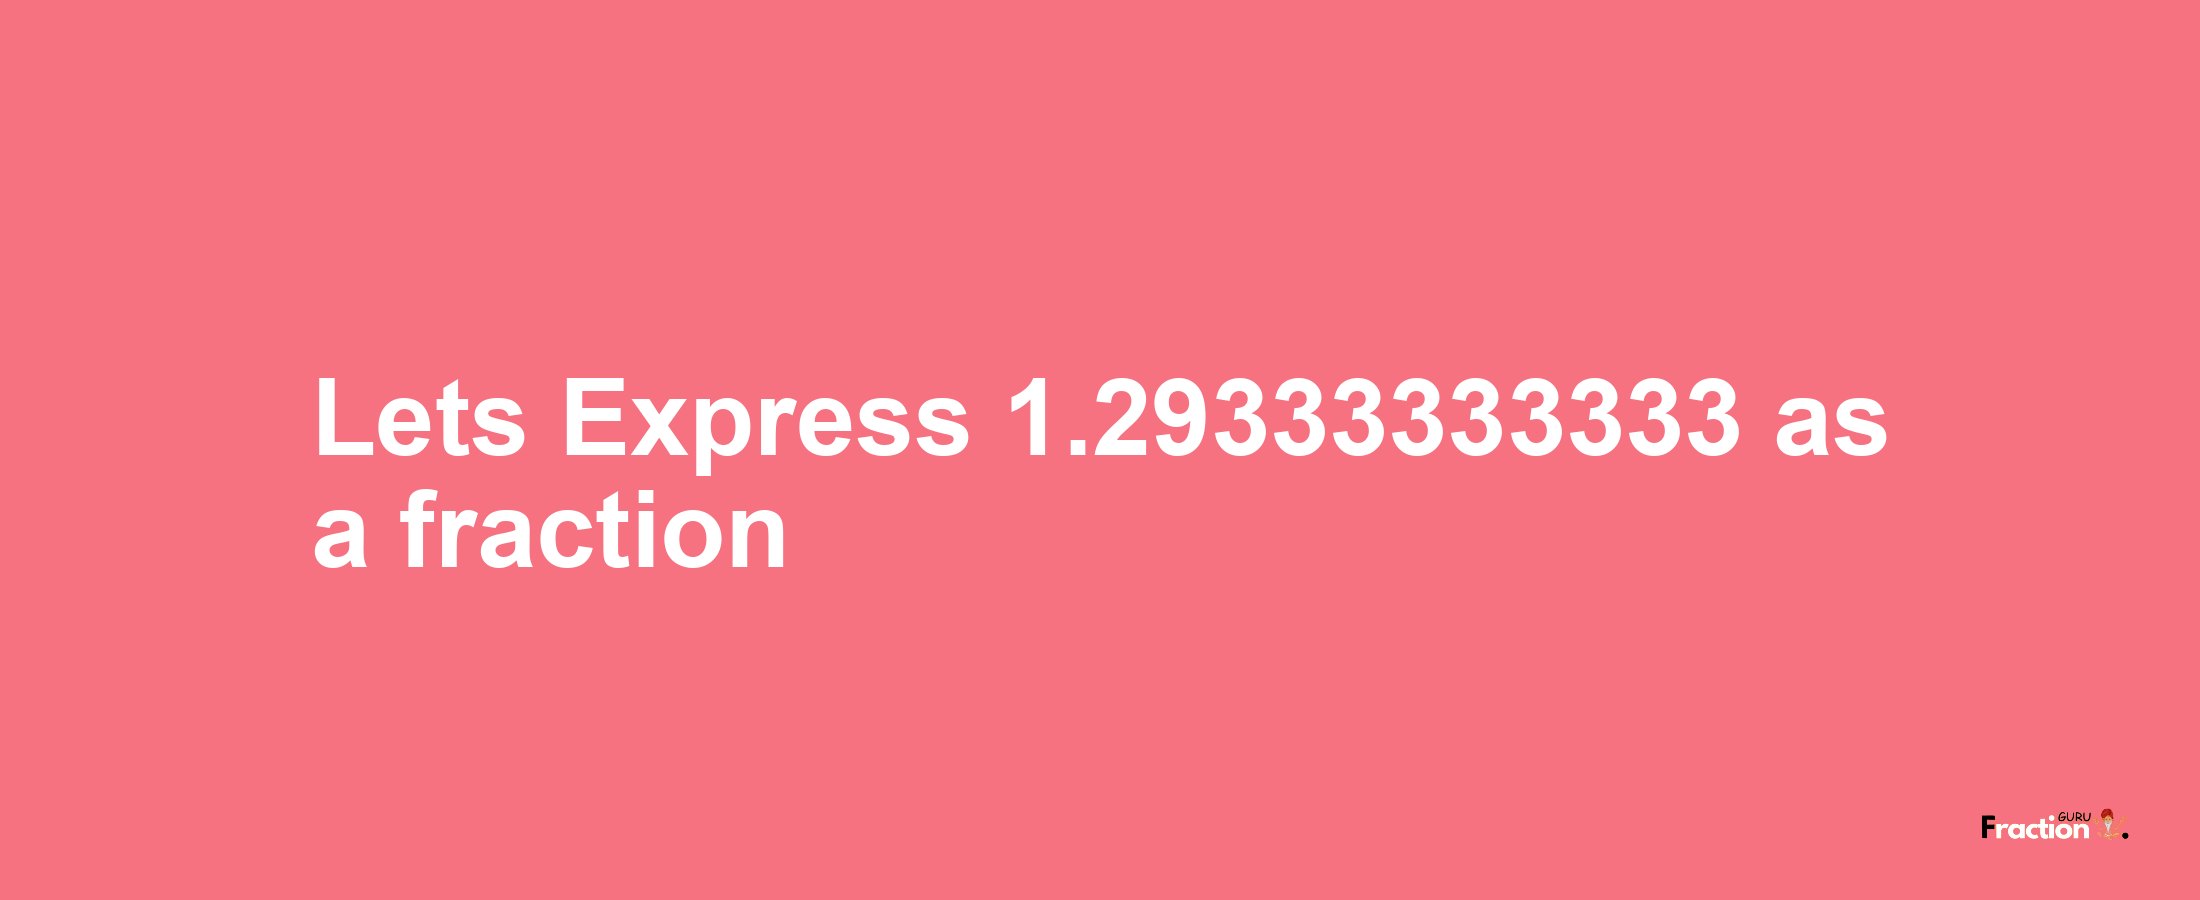 Lets Express 1.29333333333 as afraction